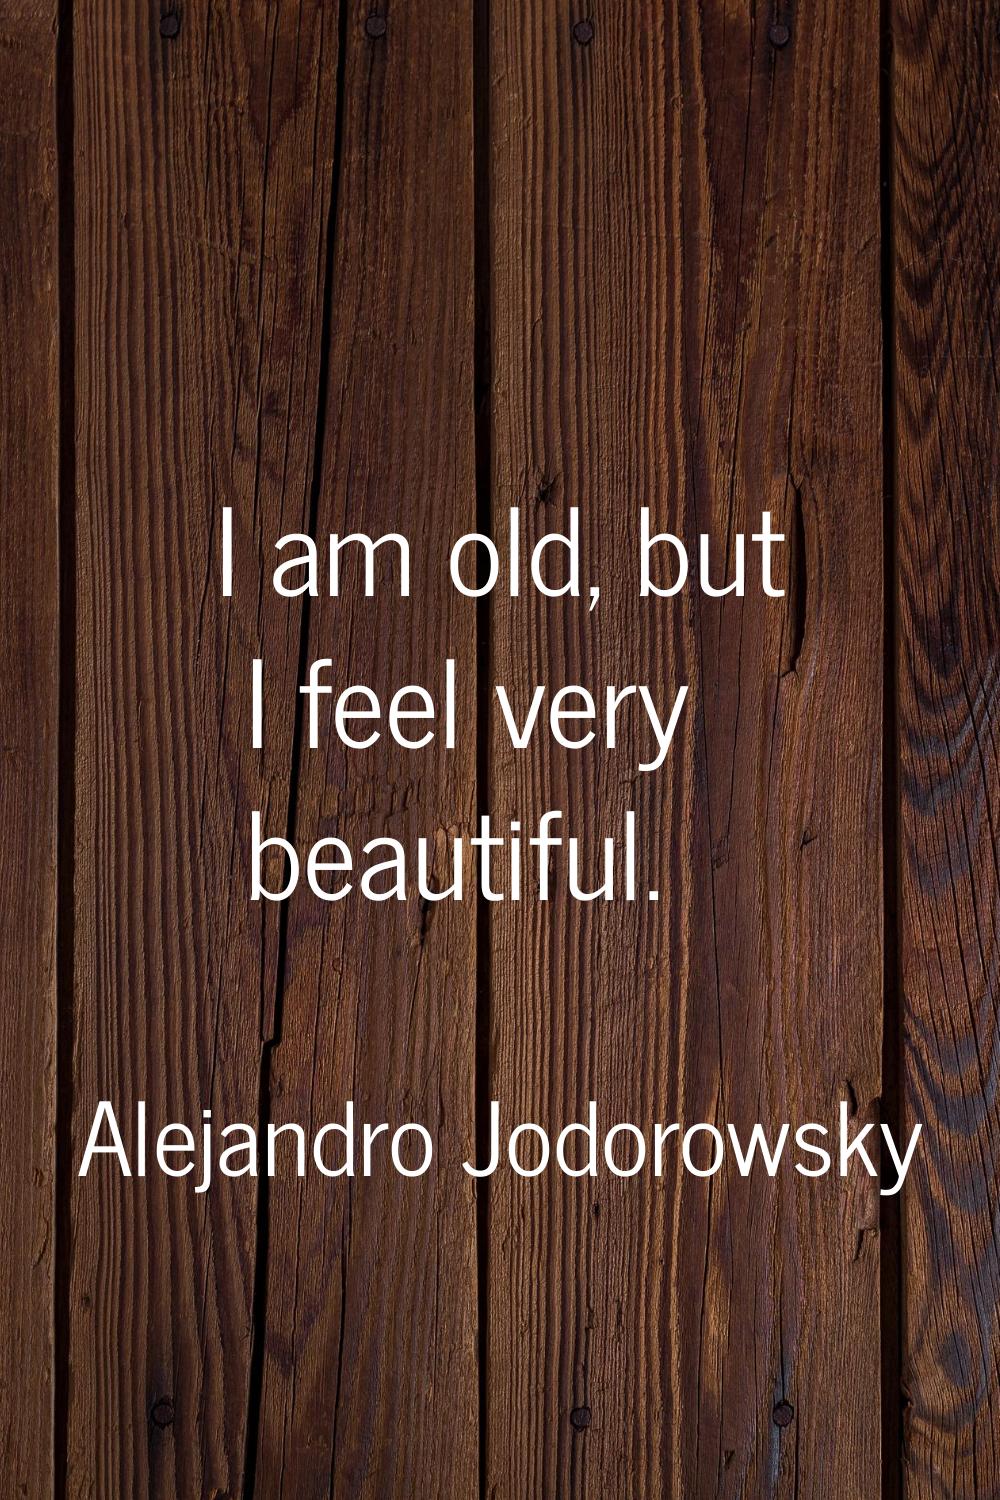 I am old, but I feel very beautiful.